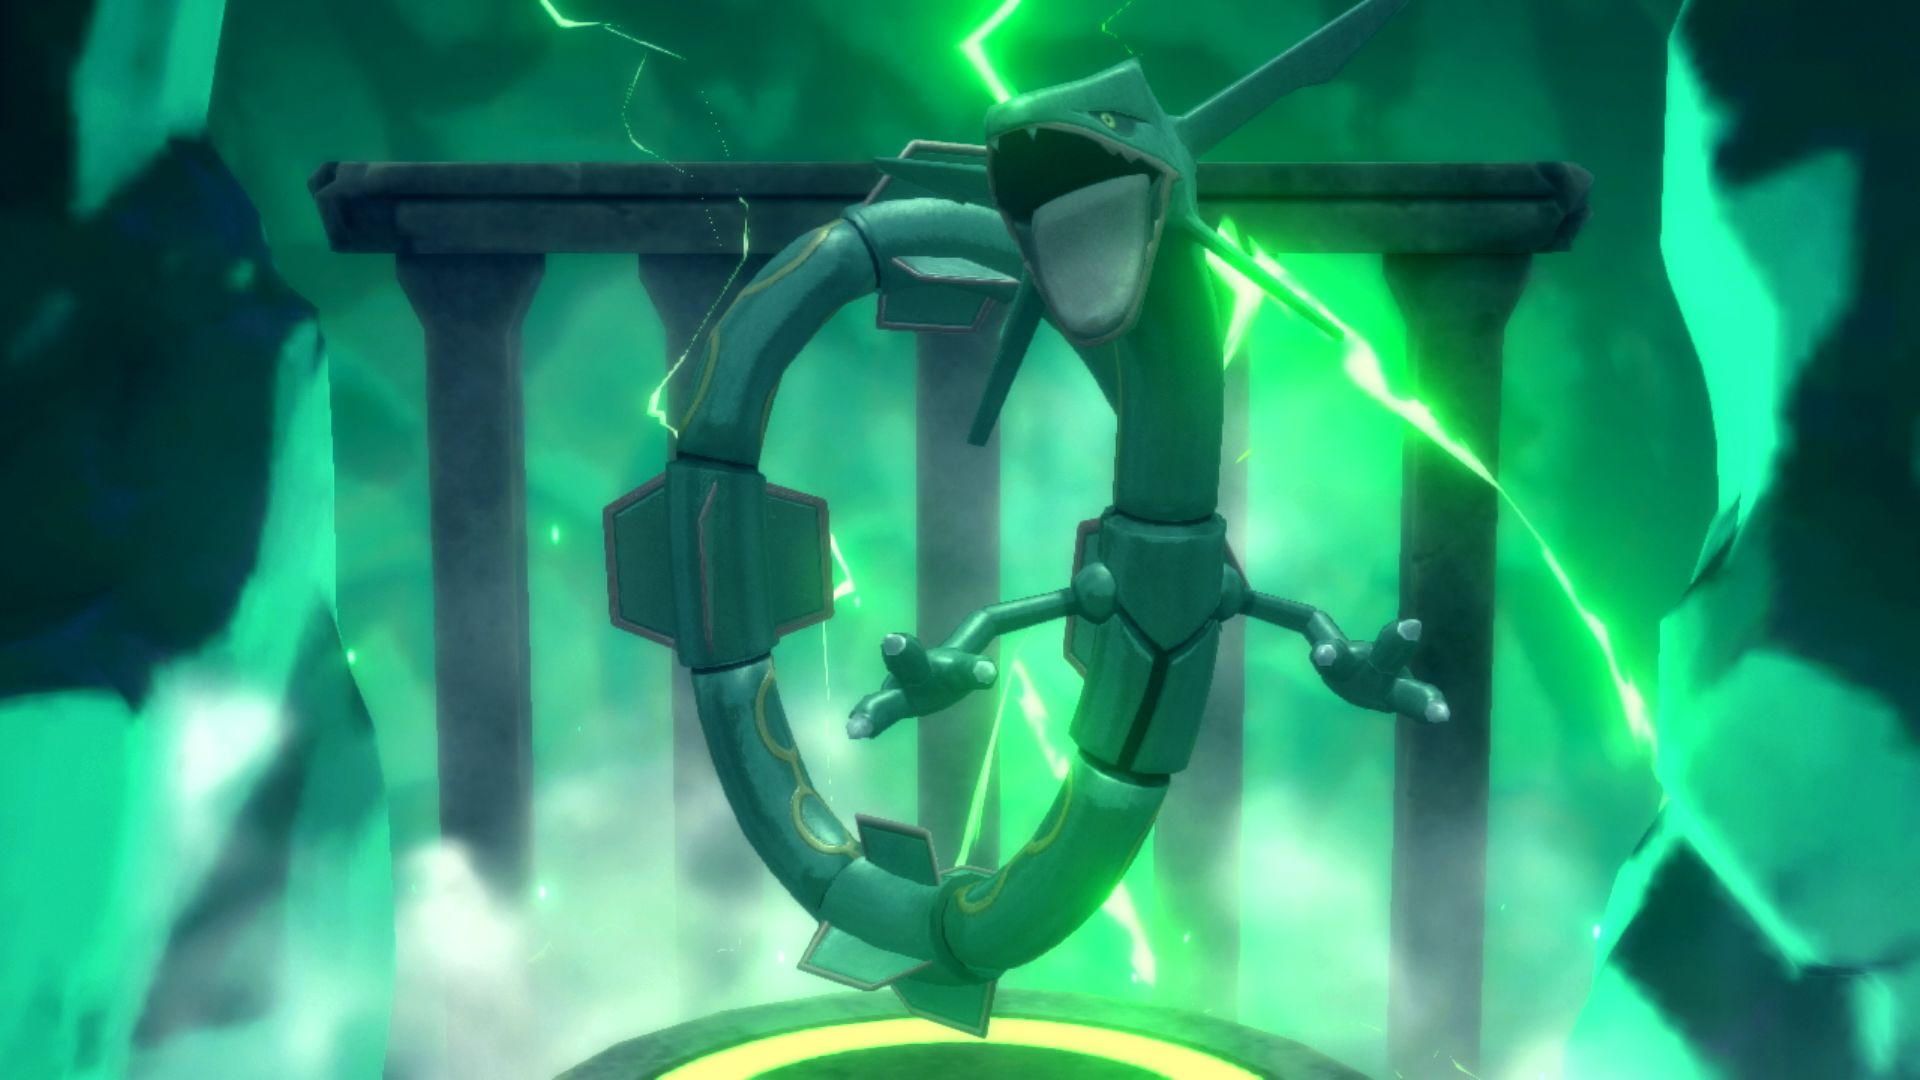 Pokémon Brilliant Diamond & Shining Pearl Screenshot of Rayquaza, a serpent-like dragon pokémon, coiling in the air near a mystical temple, ready to strike.